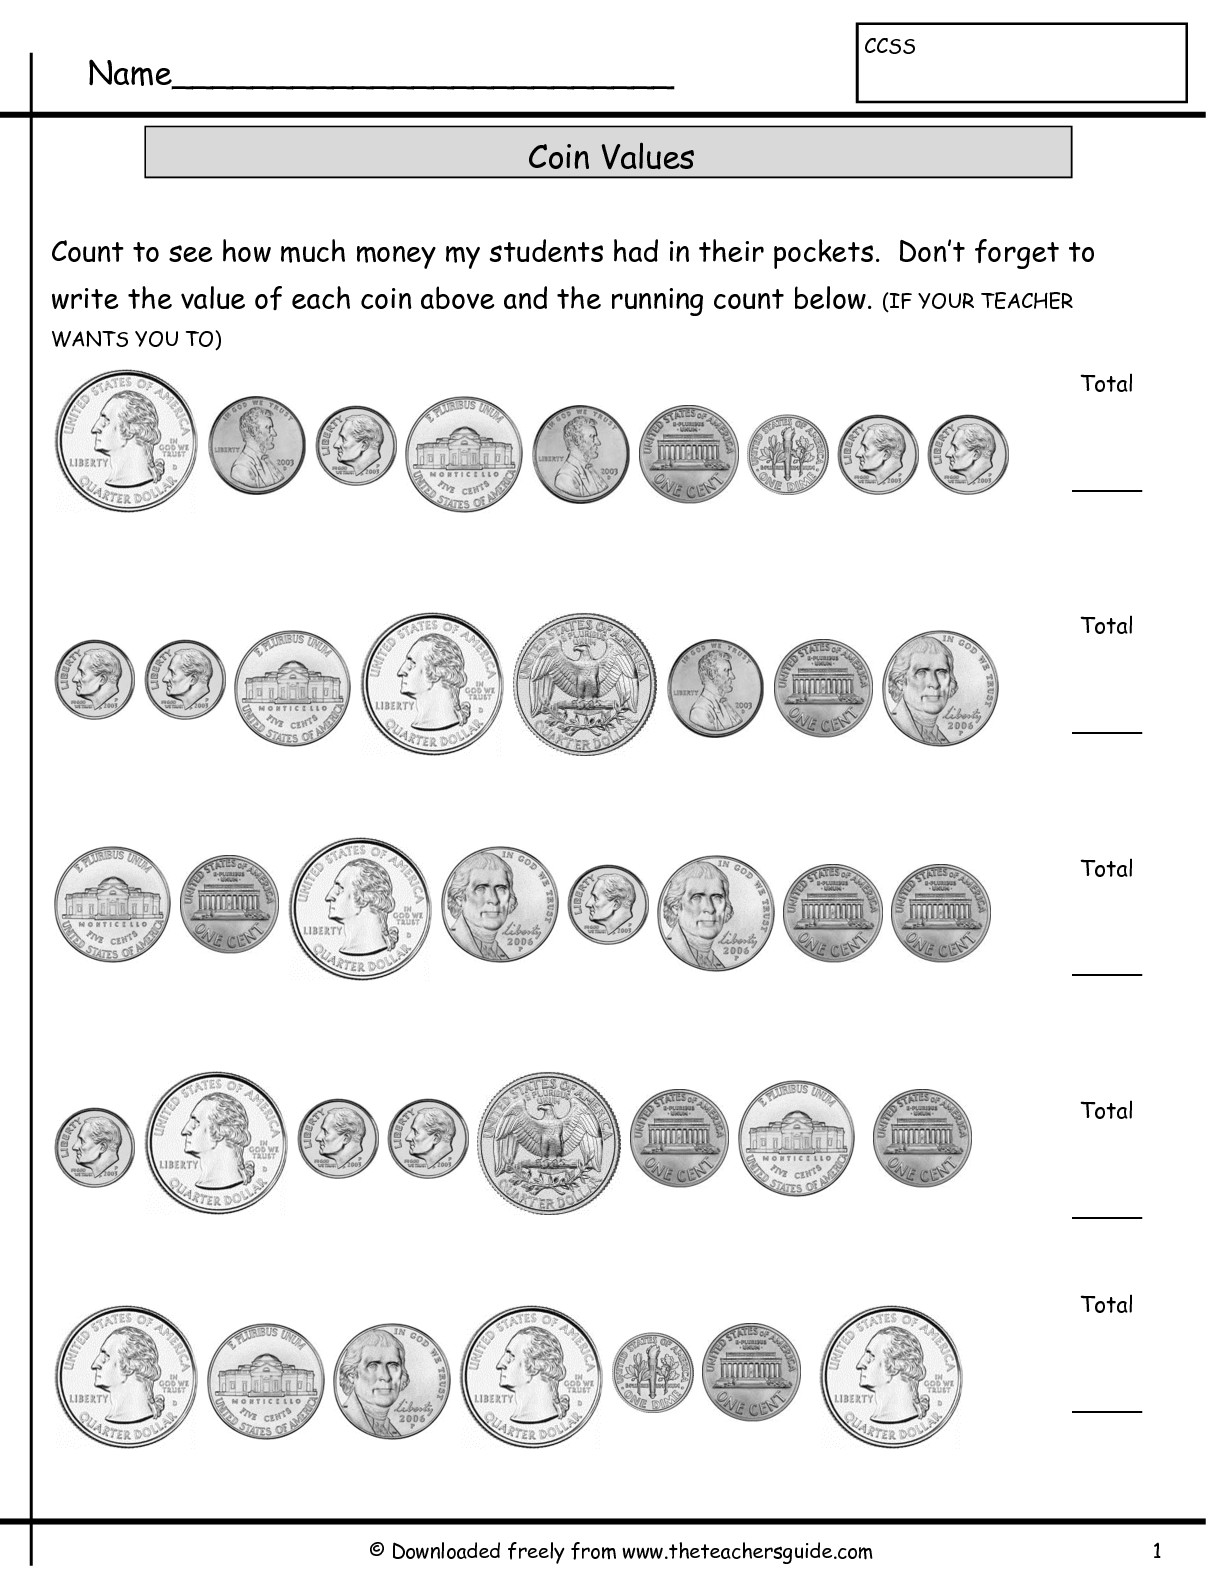 Counting Coins Worksheets Image